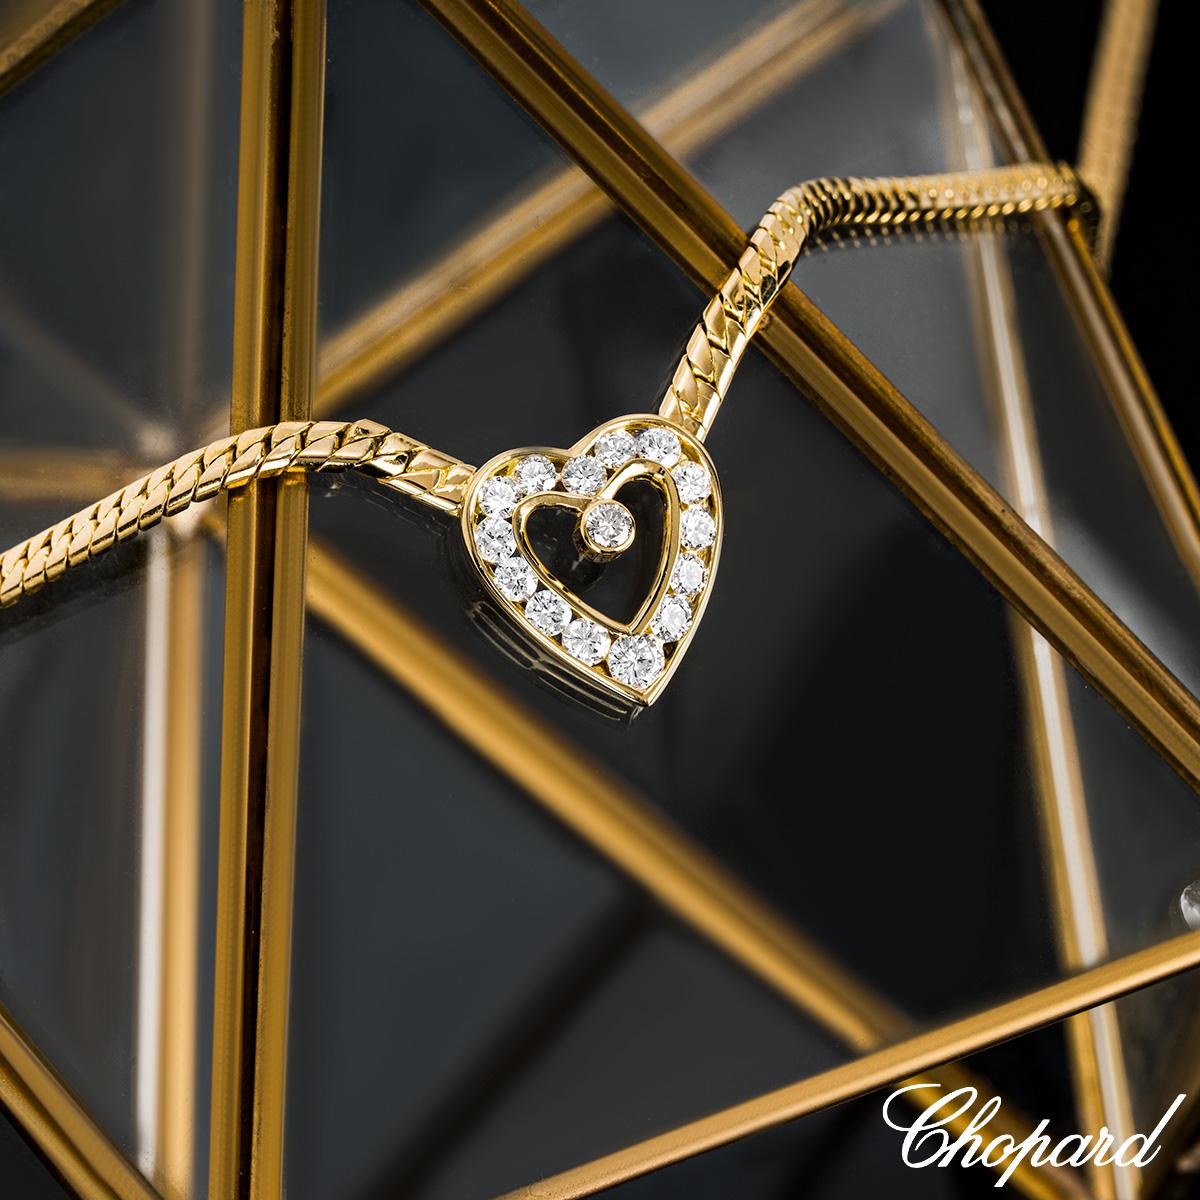 Chopard Yellow Gold Diamond Heart Necklace 0.94ct TDW 2